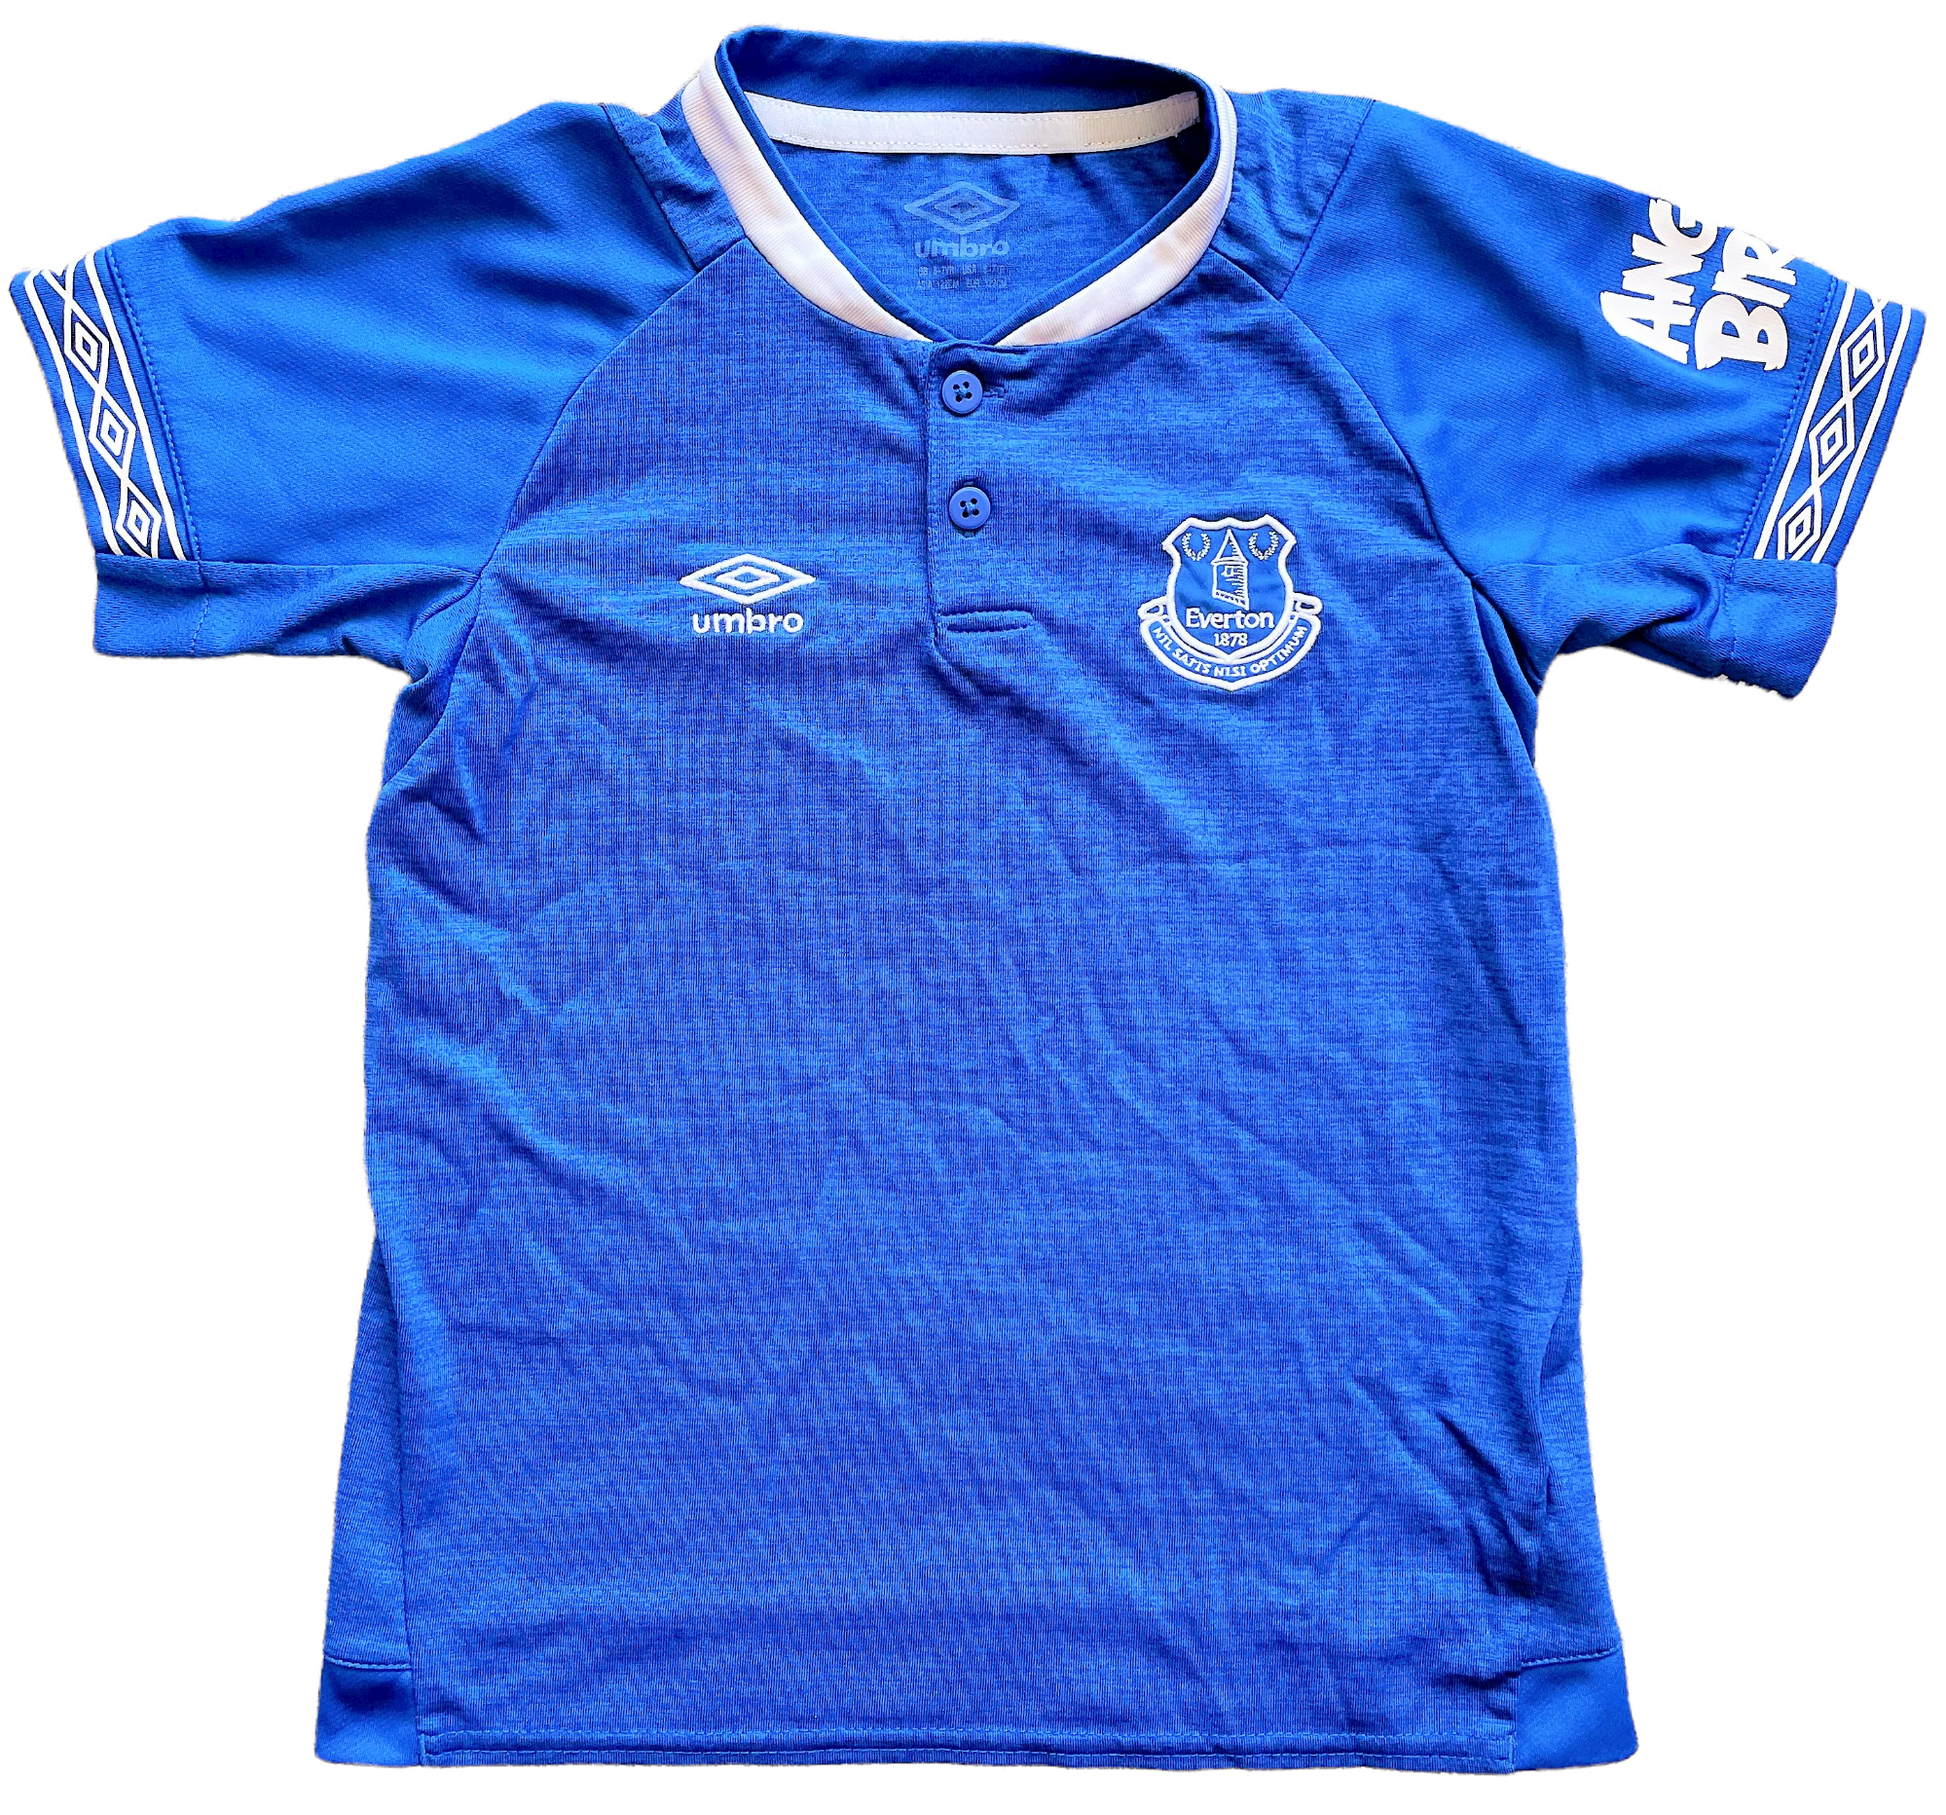 2018-19 Everton Home Shirt (excellent) Childs 6 to 7